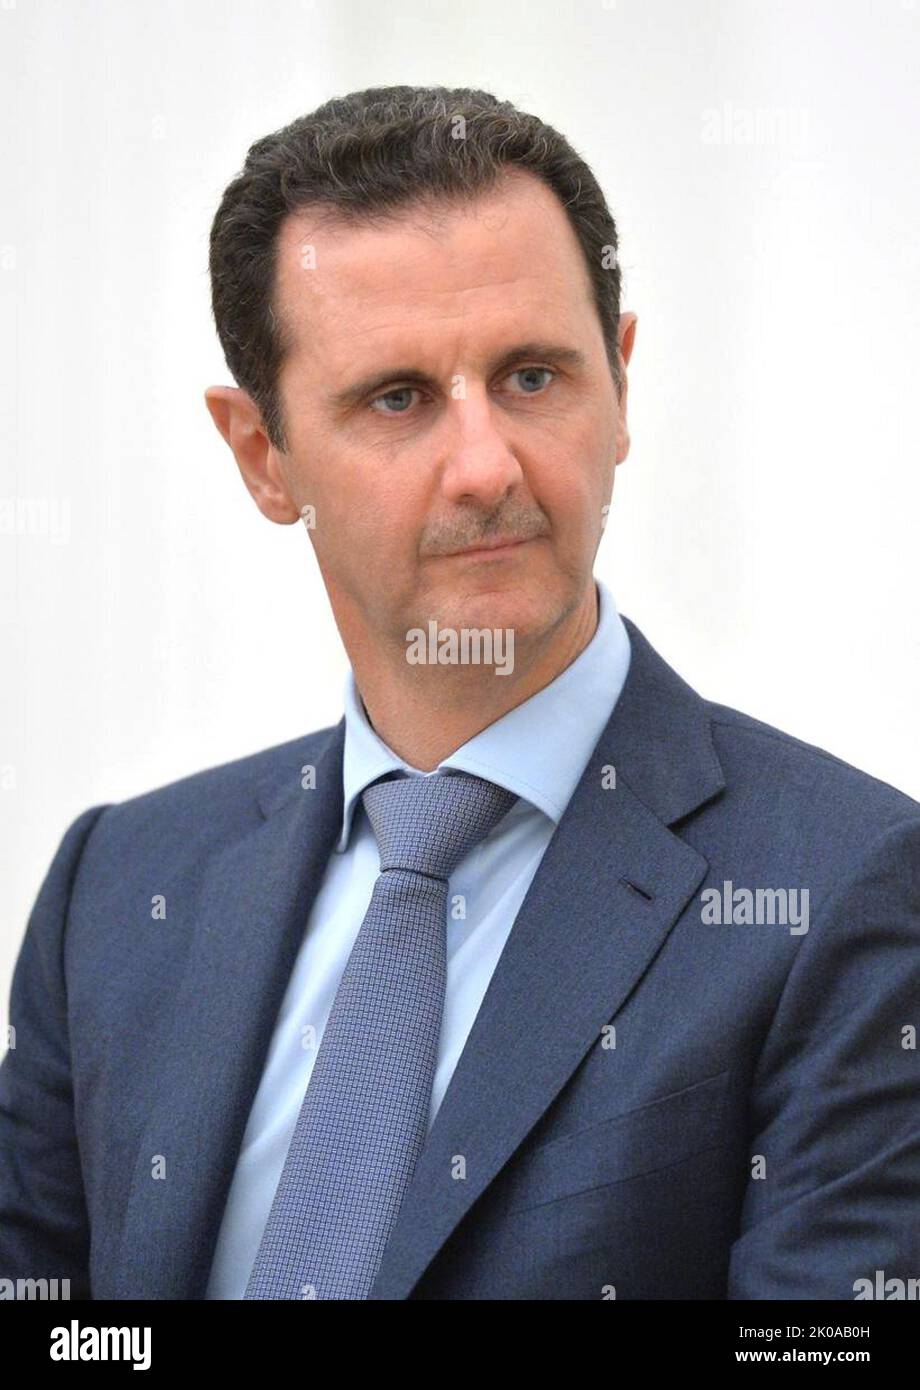 Bashar al-Assad (born 11 September 1965) Syrian politician; president of Syria, since 2000. In addition, he is the commander-in-chief of the Syrian Armed Forces and the Secretary-General of the Central Command of the Arab Socialist Ba'ath Party. His father, Hafez al-Assad, was the president of Syria before him, serving from 1971 to 2000 Stock Photo